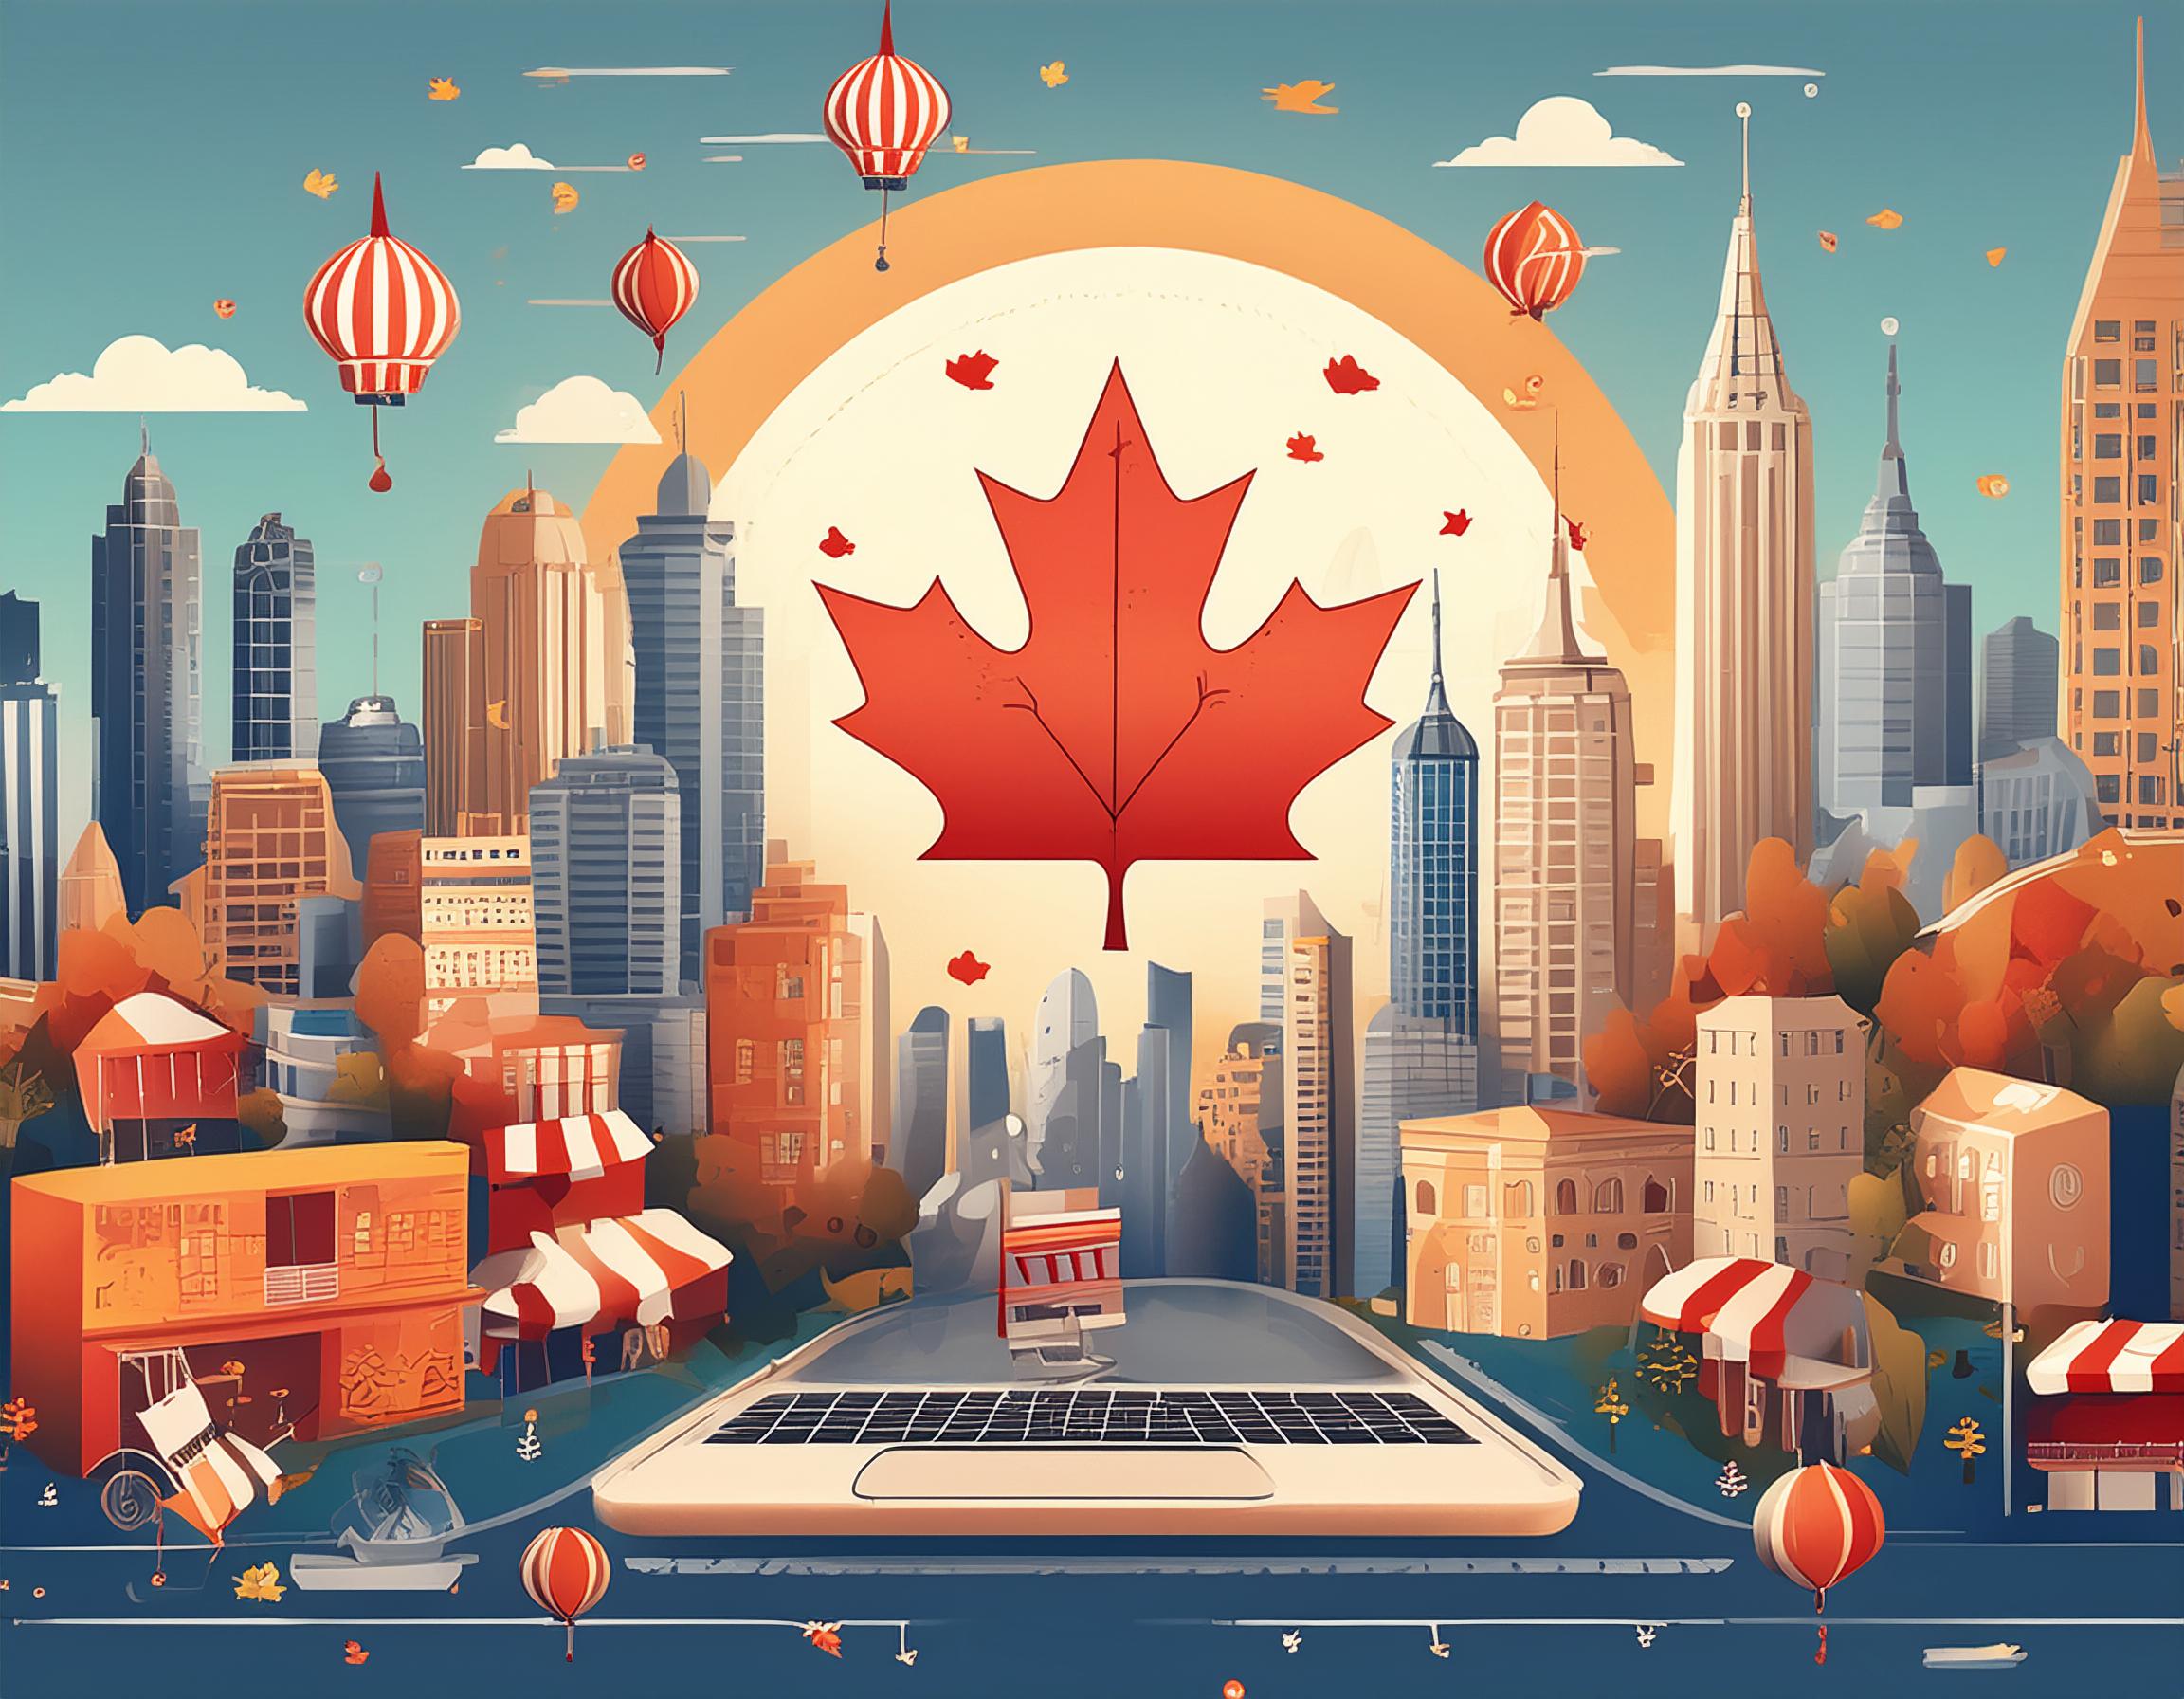 An illustration depicting the dynamic landscape of Canada's eCommerce sector, featuring online shopping platforms, mobile devices, social commerce channels, and parcel forwarding services.